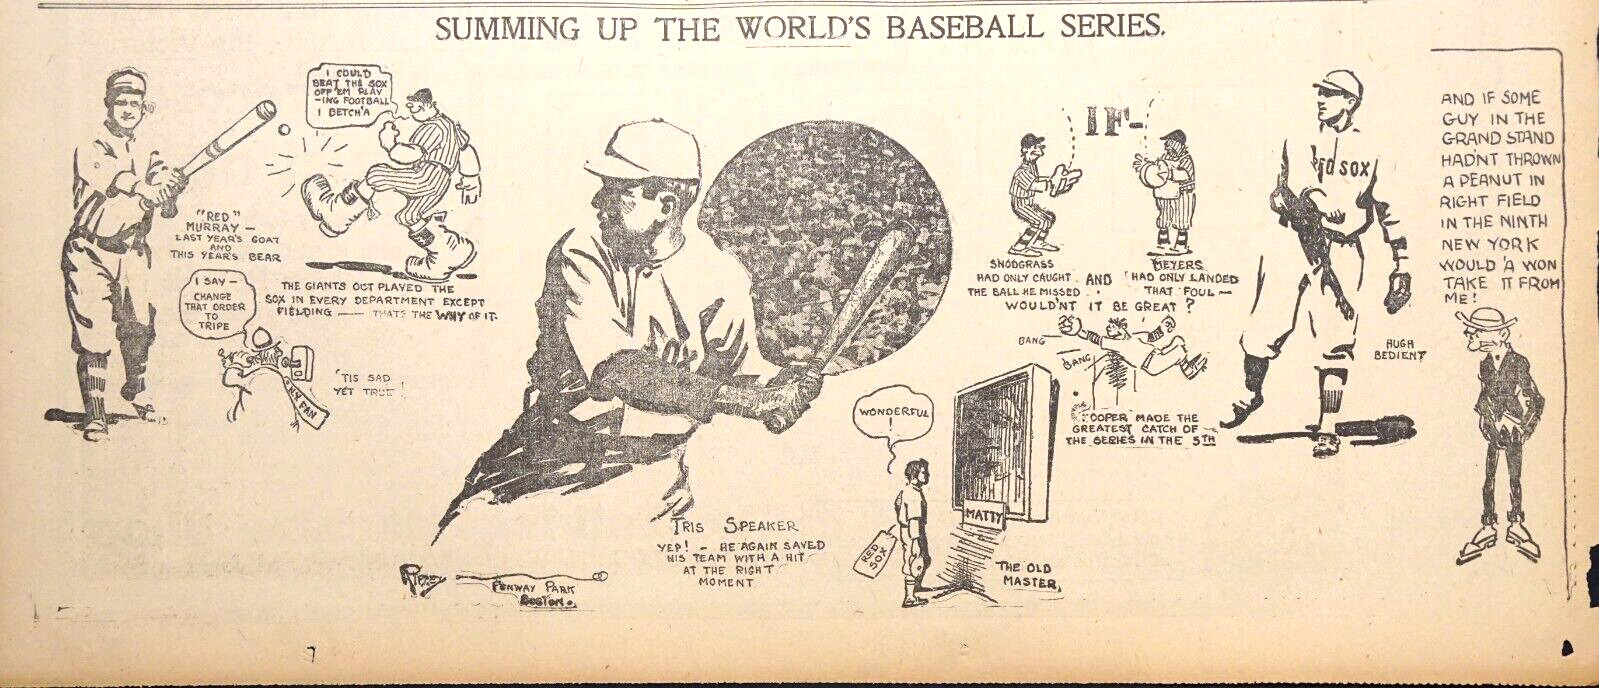 1912 Sports Page - Robert Ripley Illustration - Giants - Red Sox World Series